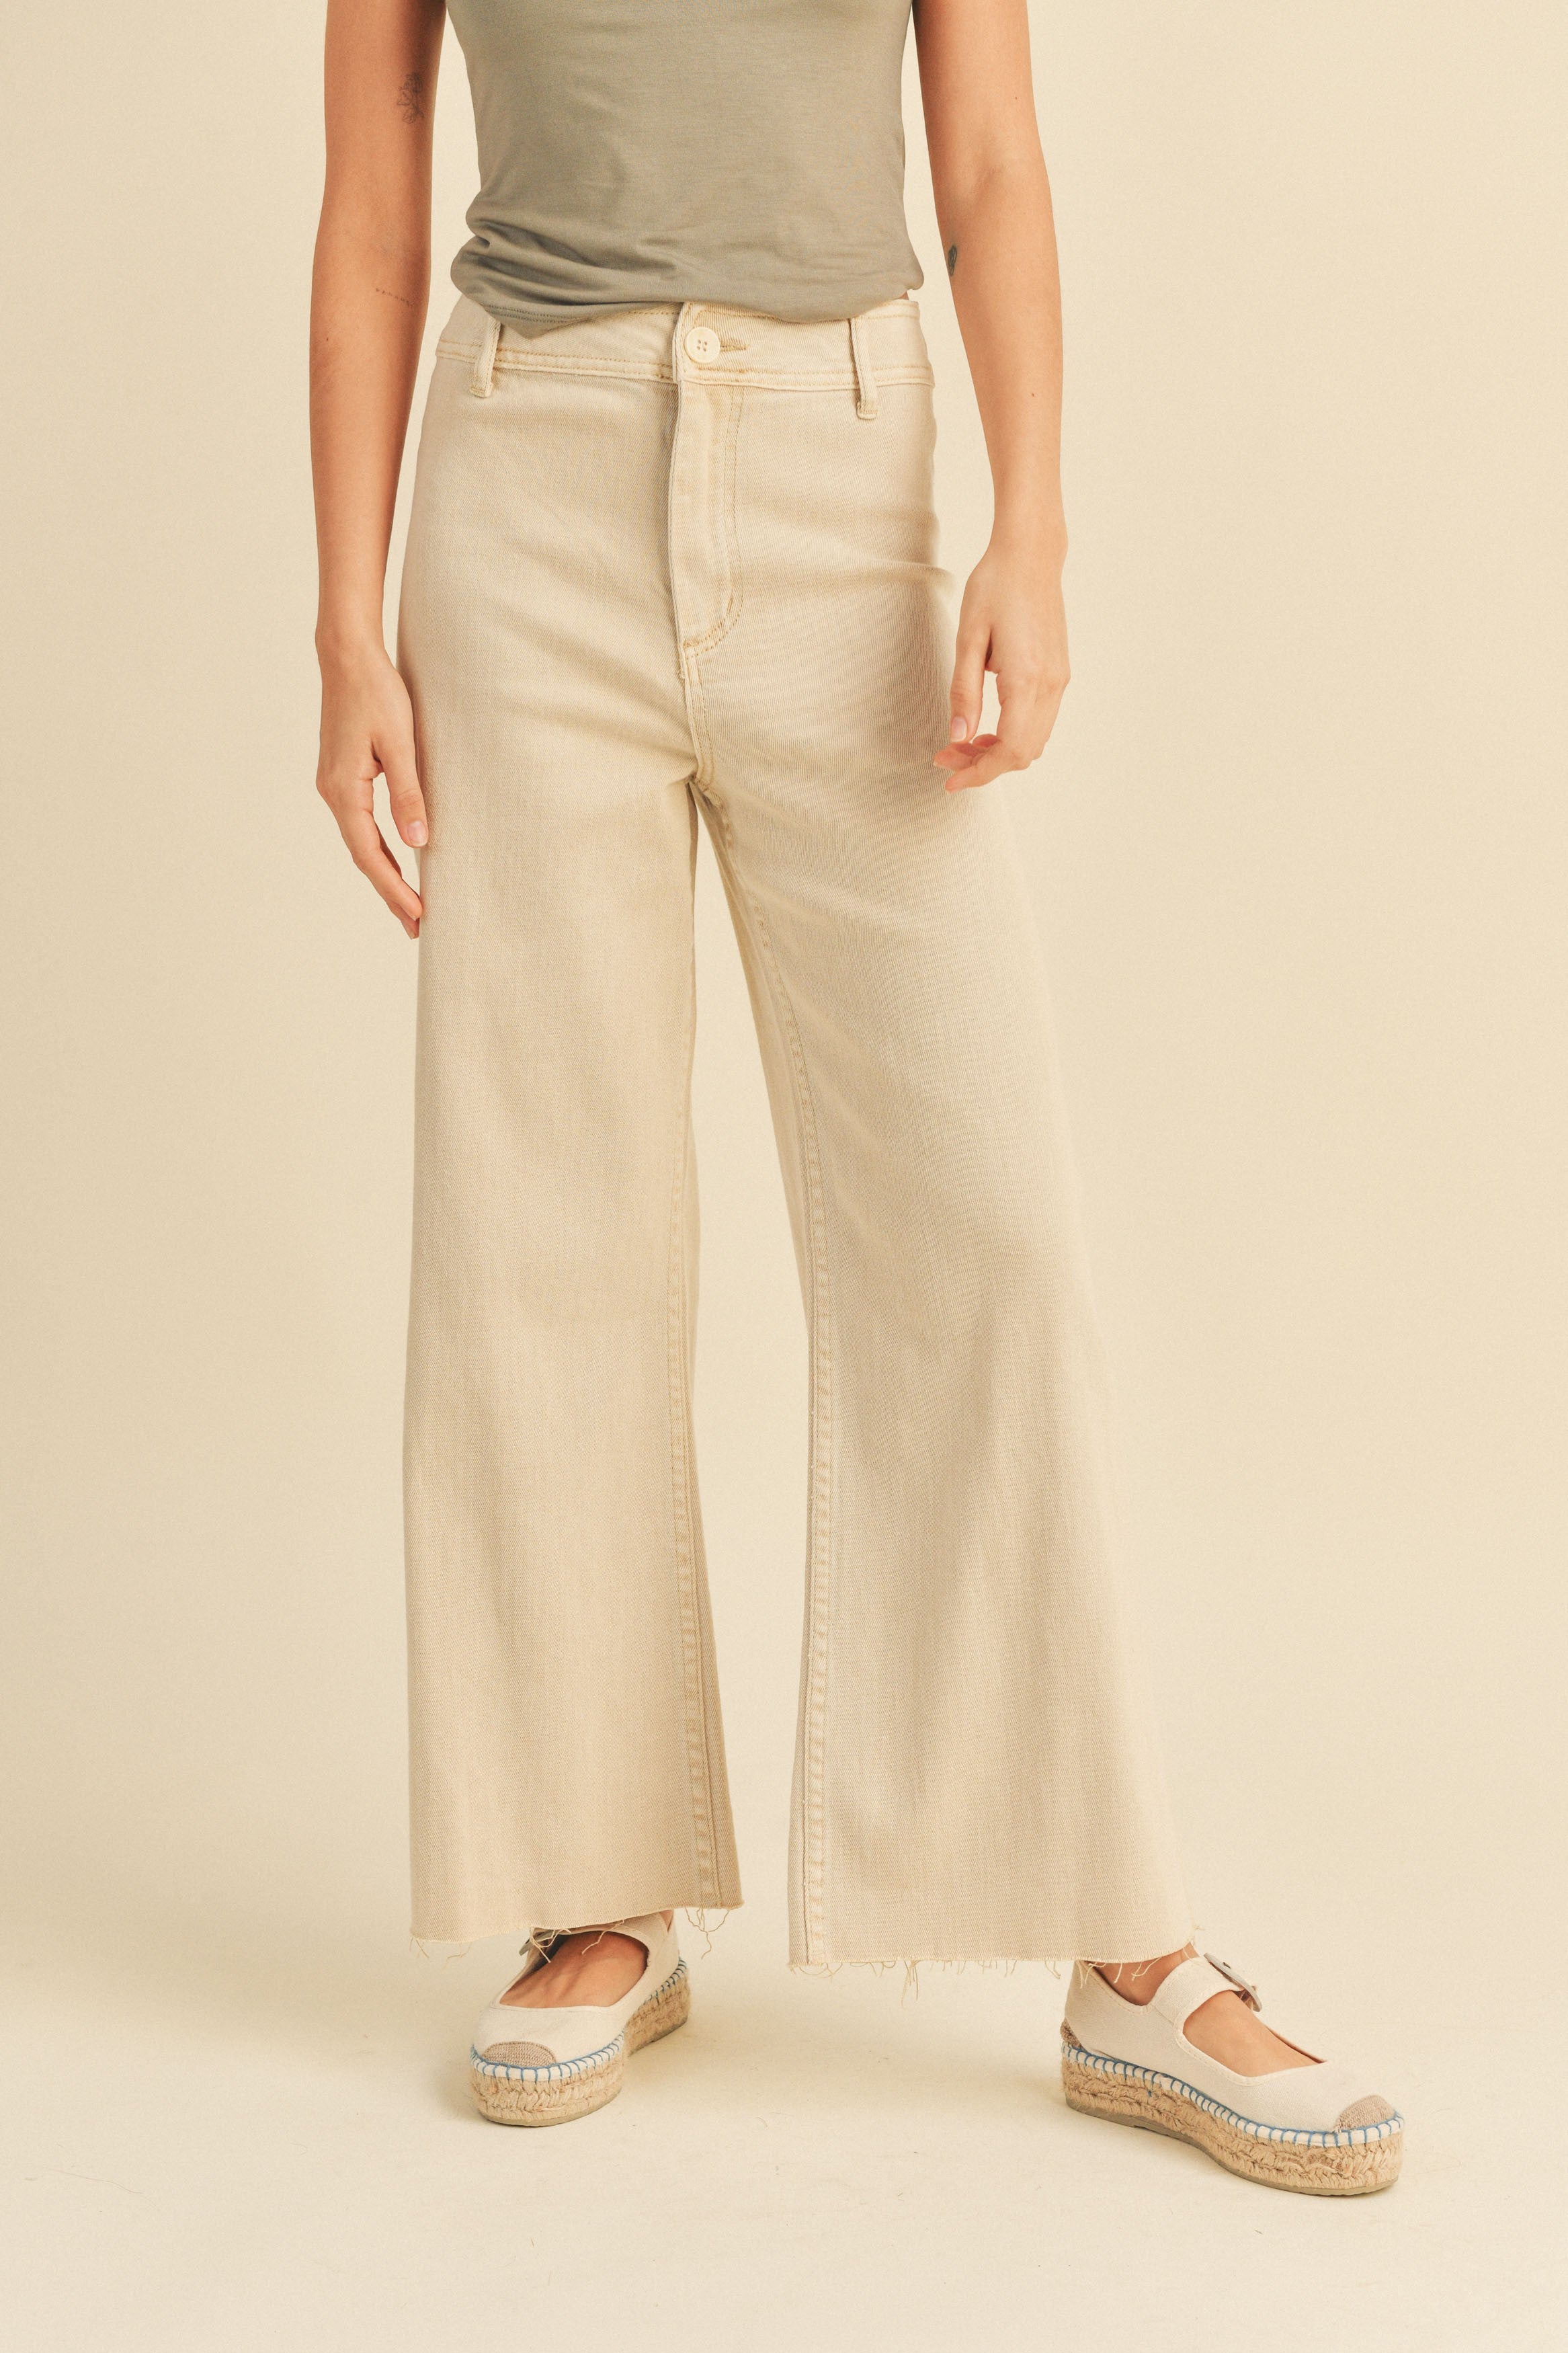 THE FRANKIE SHOP Tansy pleated twill wide-leg pants | NET-A-PORTER